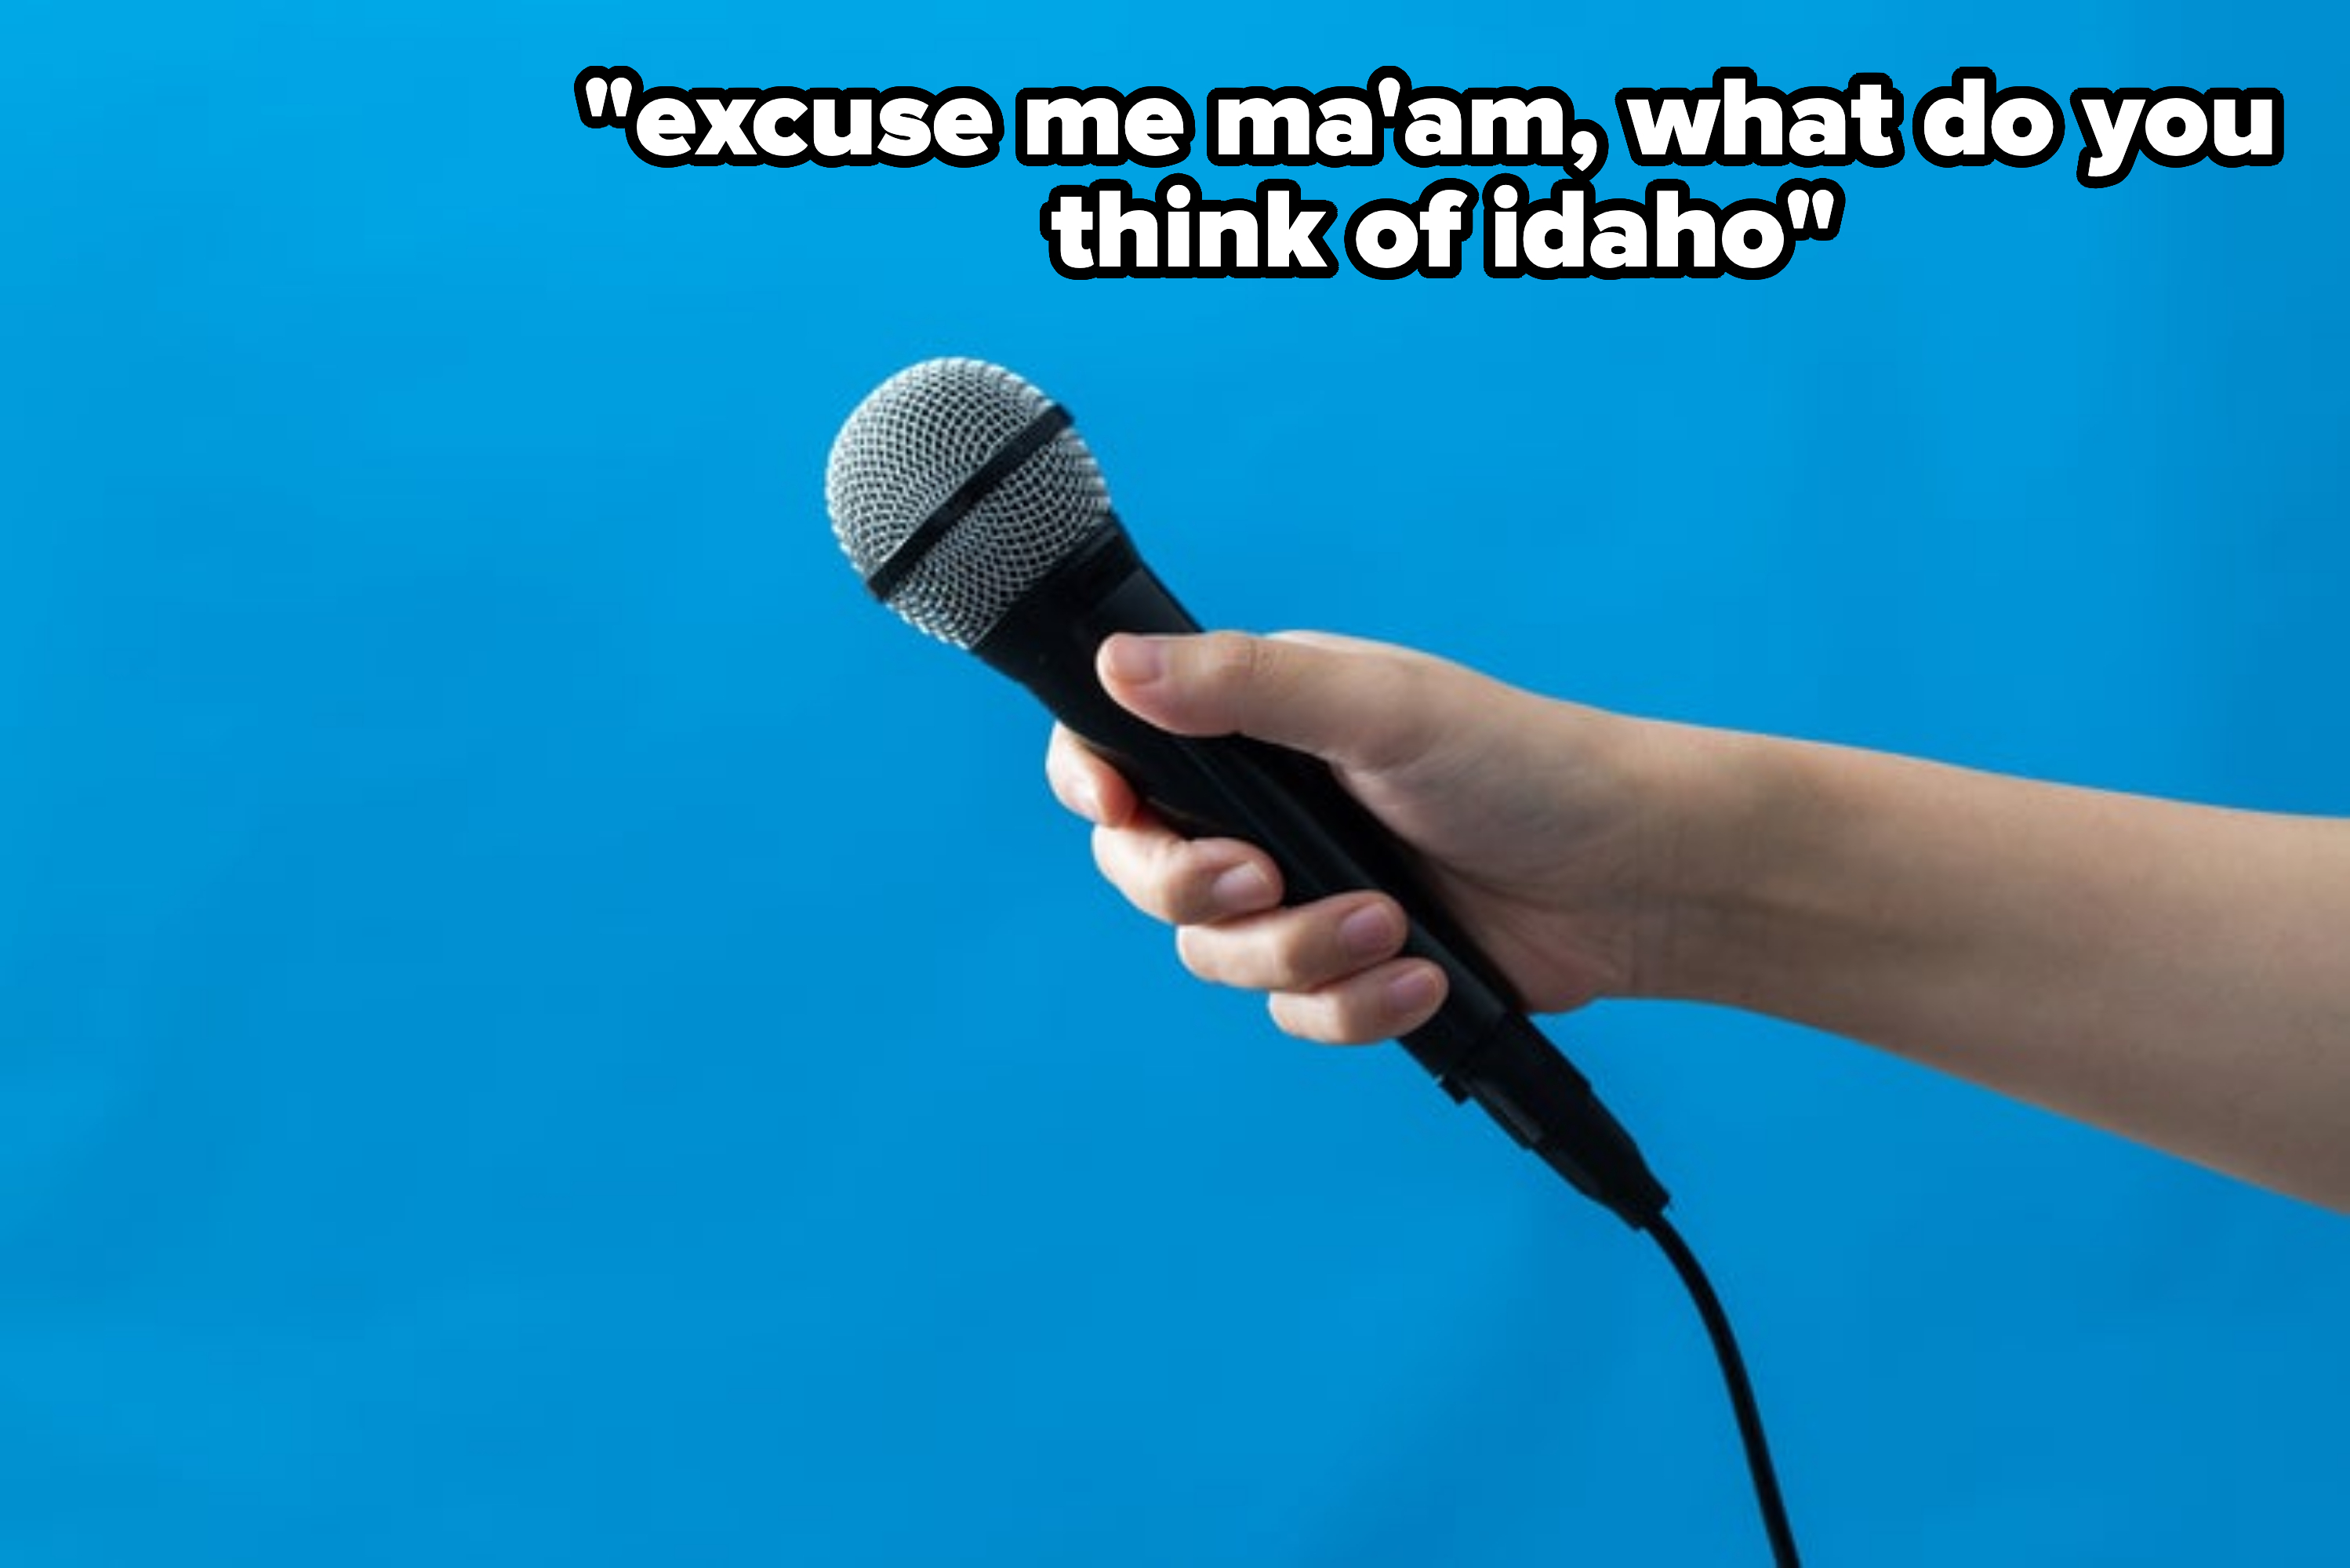 &quot;excuse me ma&#x27;am, what do you think of idaho&quot;